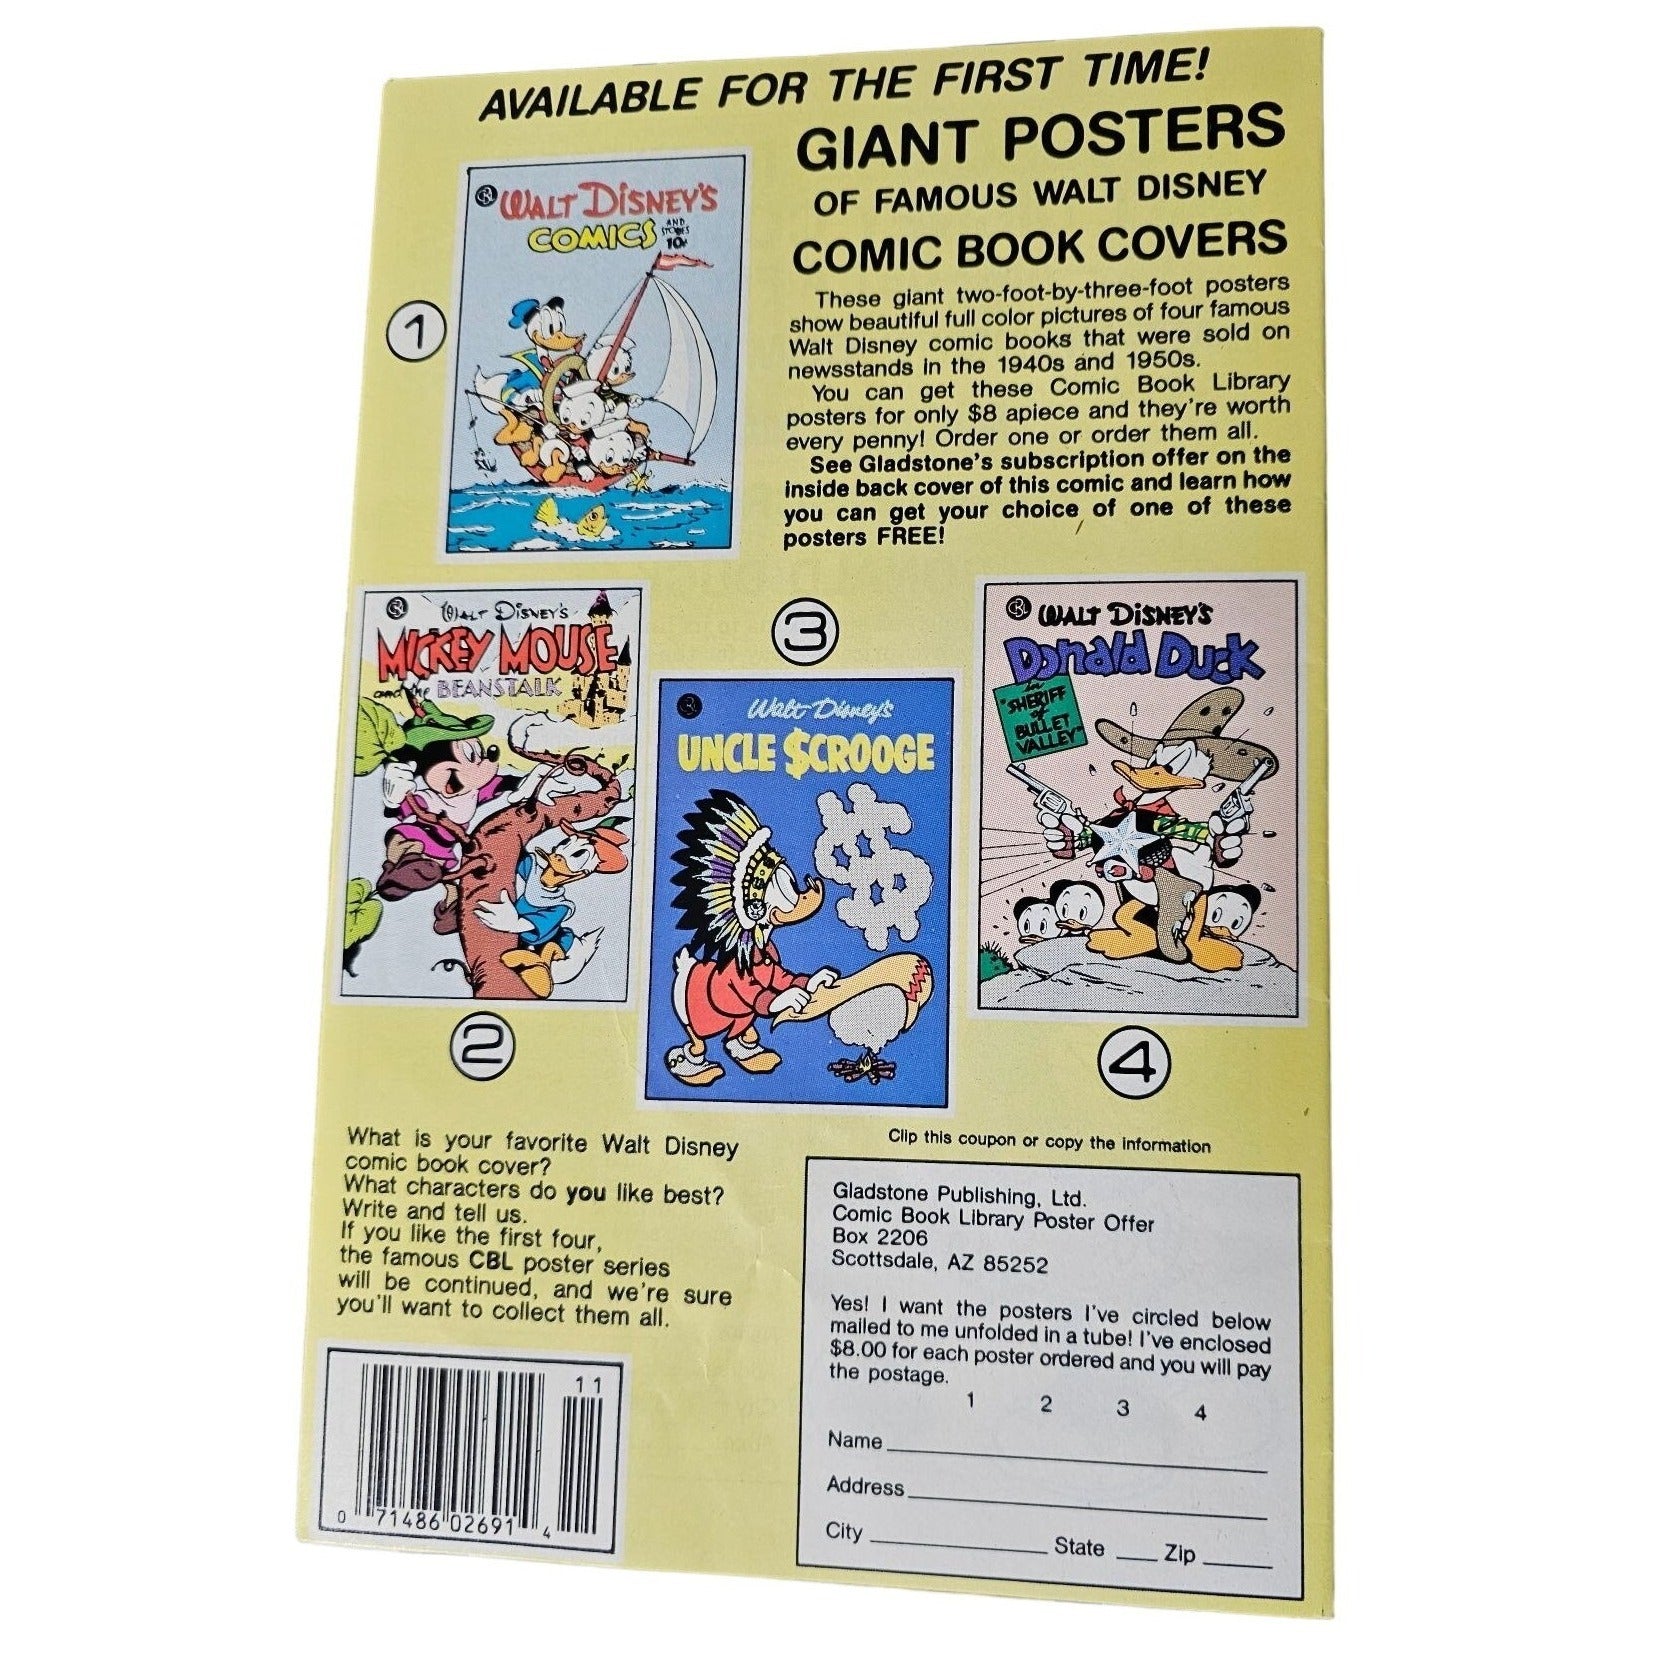 Mickey Mouse and the Seven Ghost, Chapter 2 Comic Book